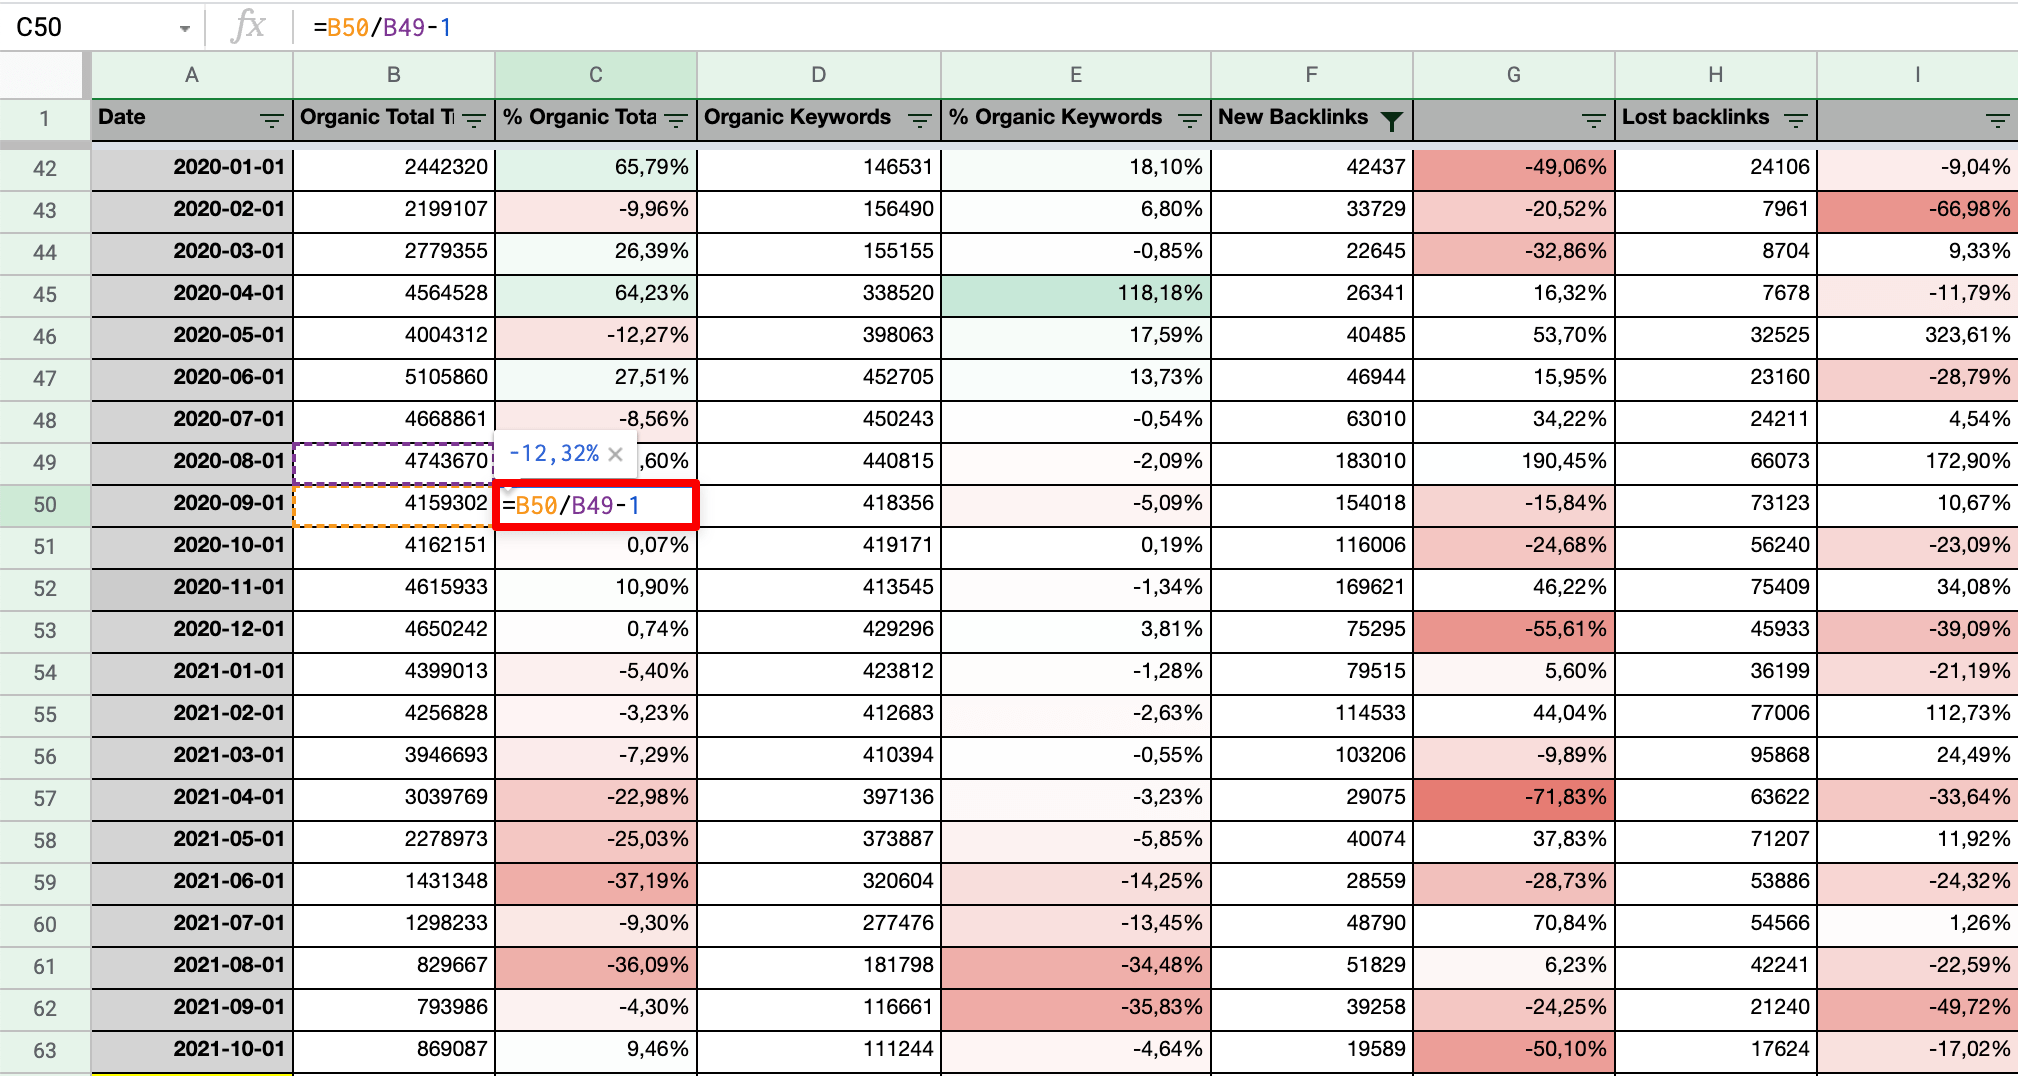 Ranking data in Excel